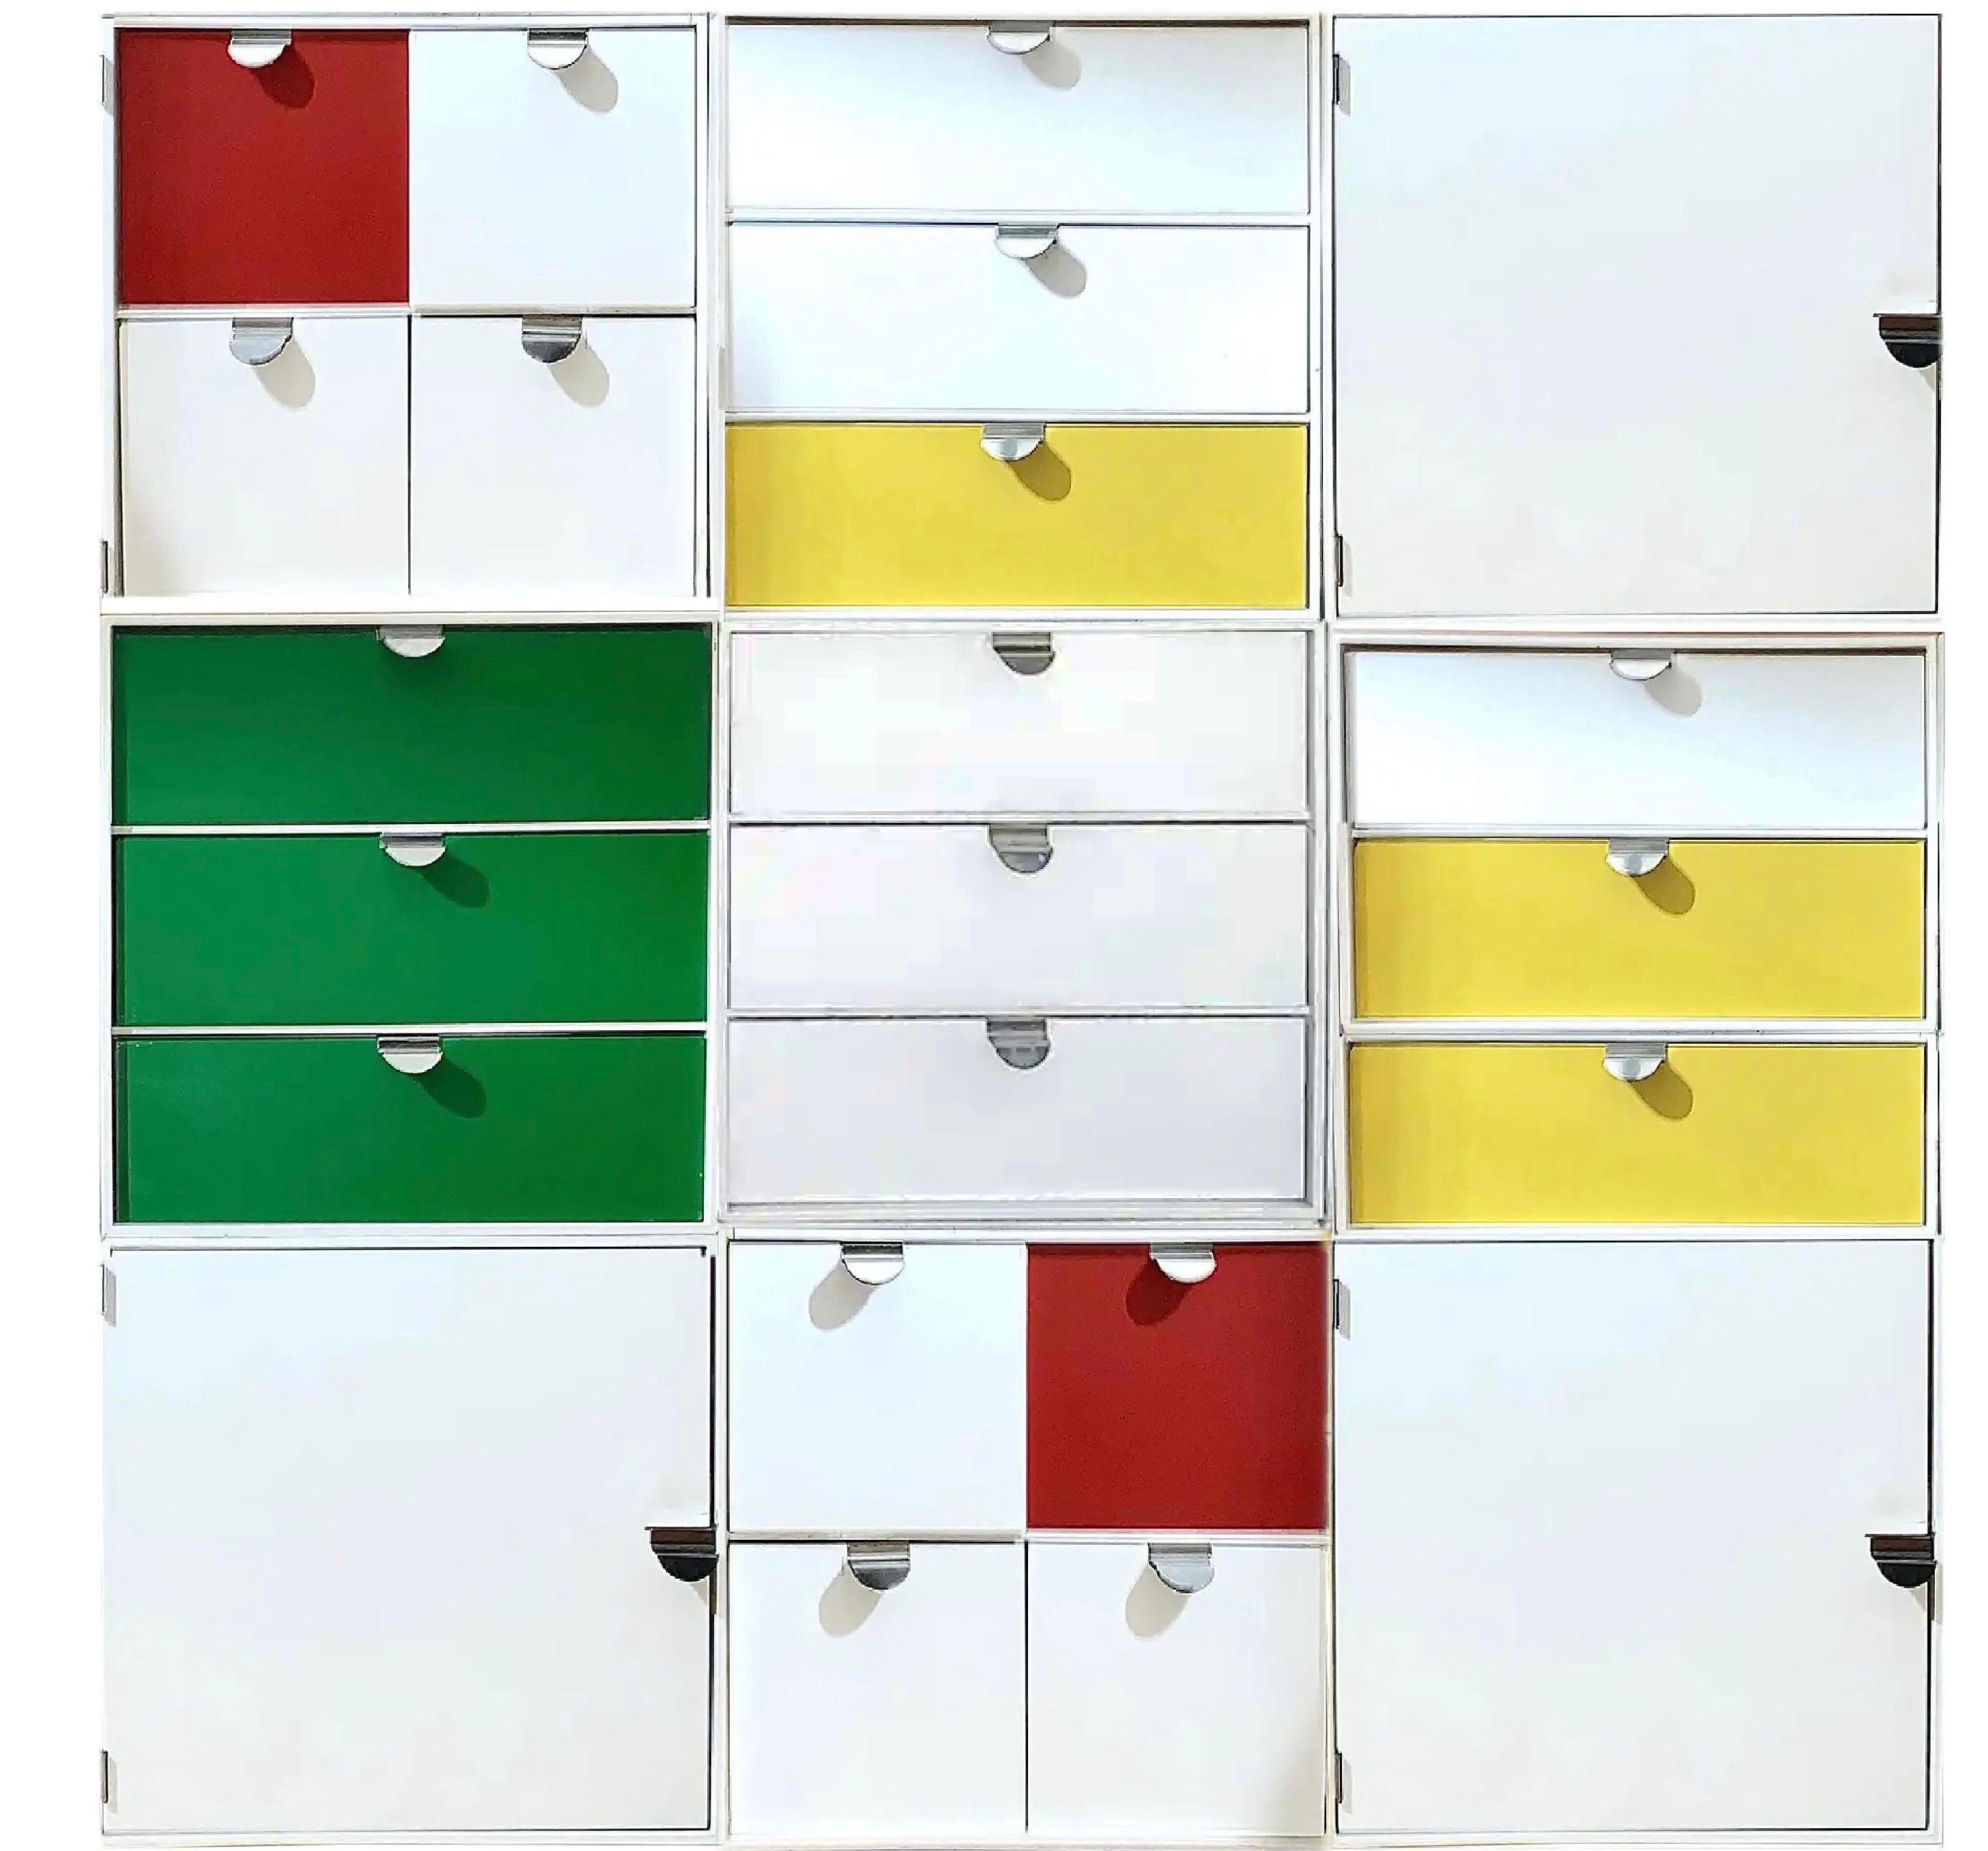 Vintage Palaset Palanox modular storage box set of 9, Red, Green, White, Yellow, Finland, 1972

Palaset Palanox, multicolored stackable boxes that allow you to build your own shelf, only produced for a few years in the early 1970s. During his